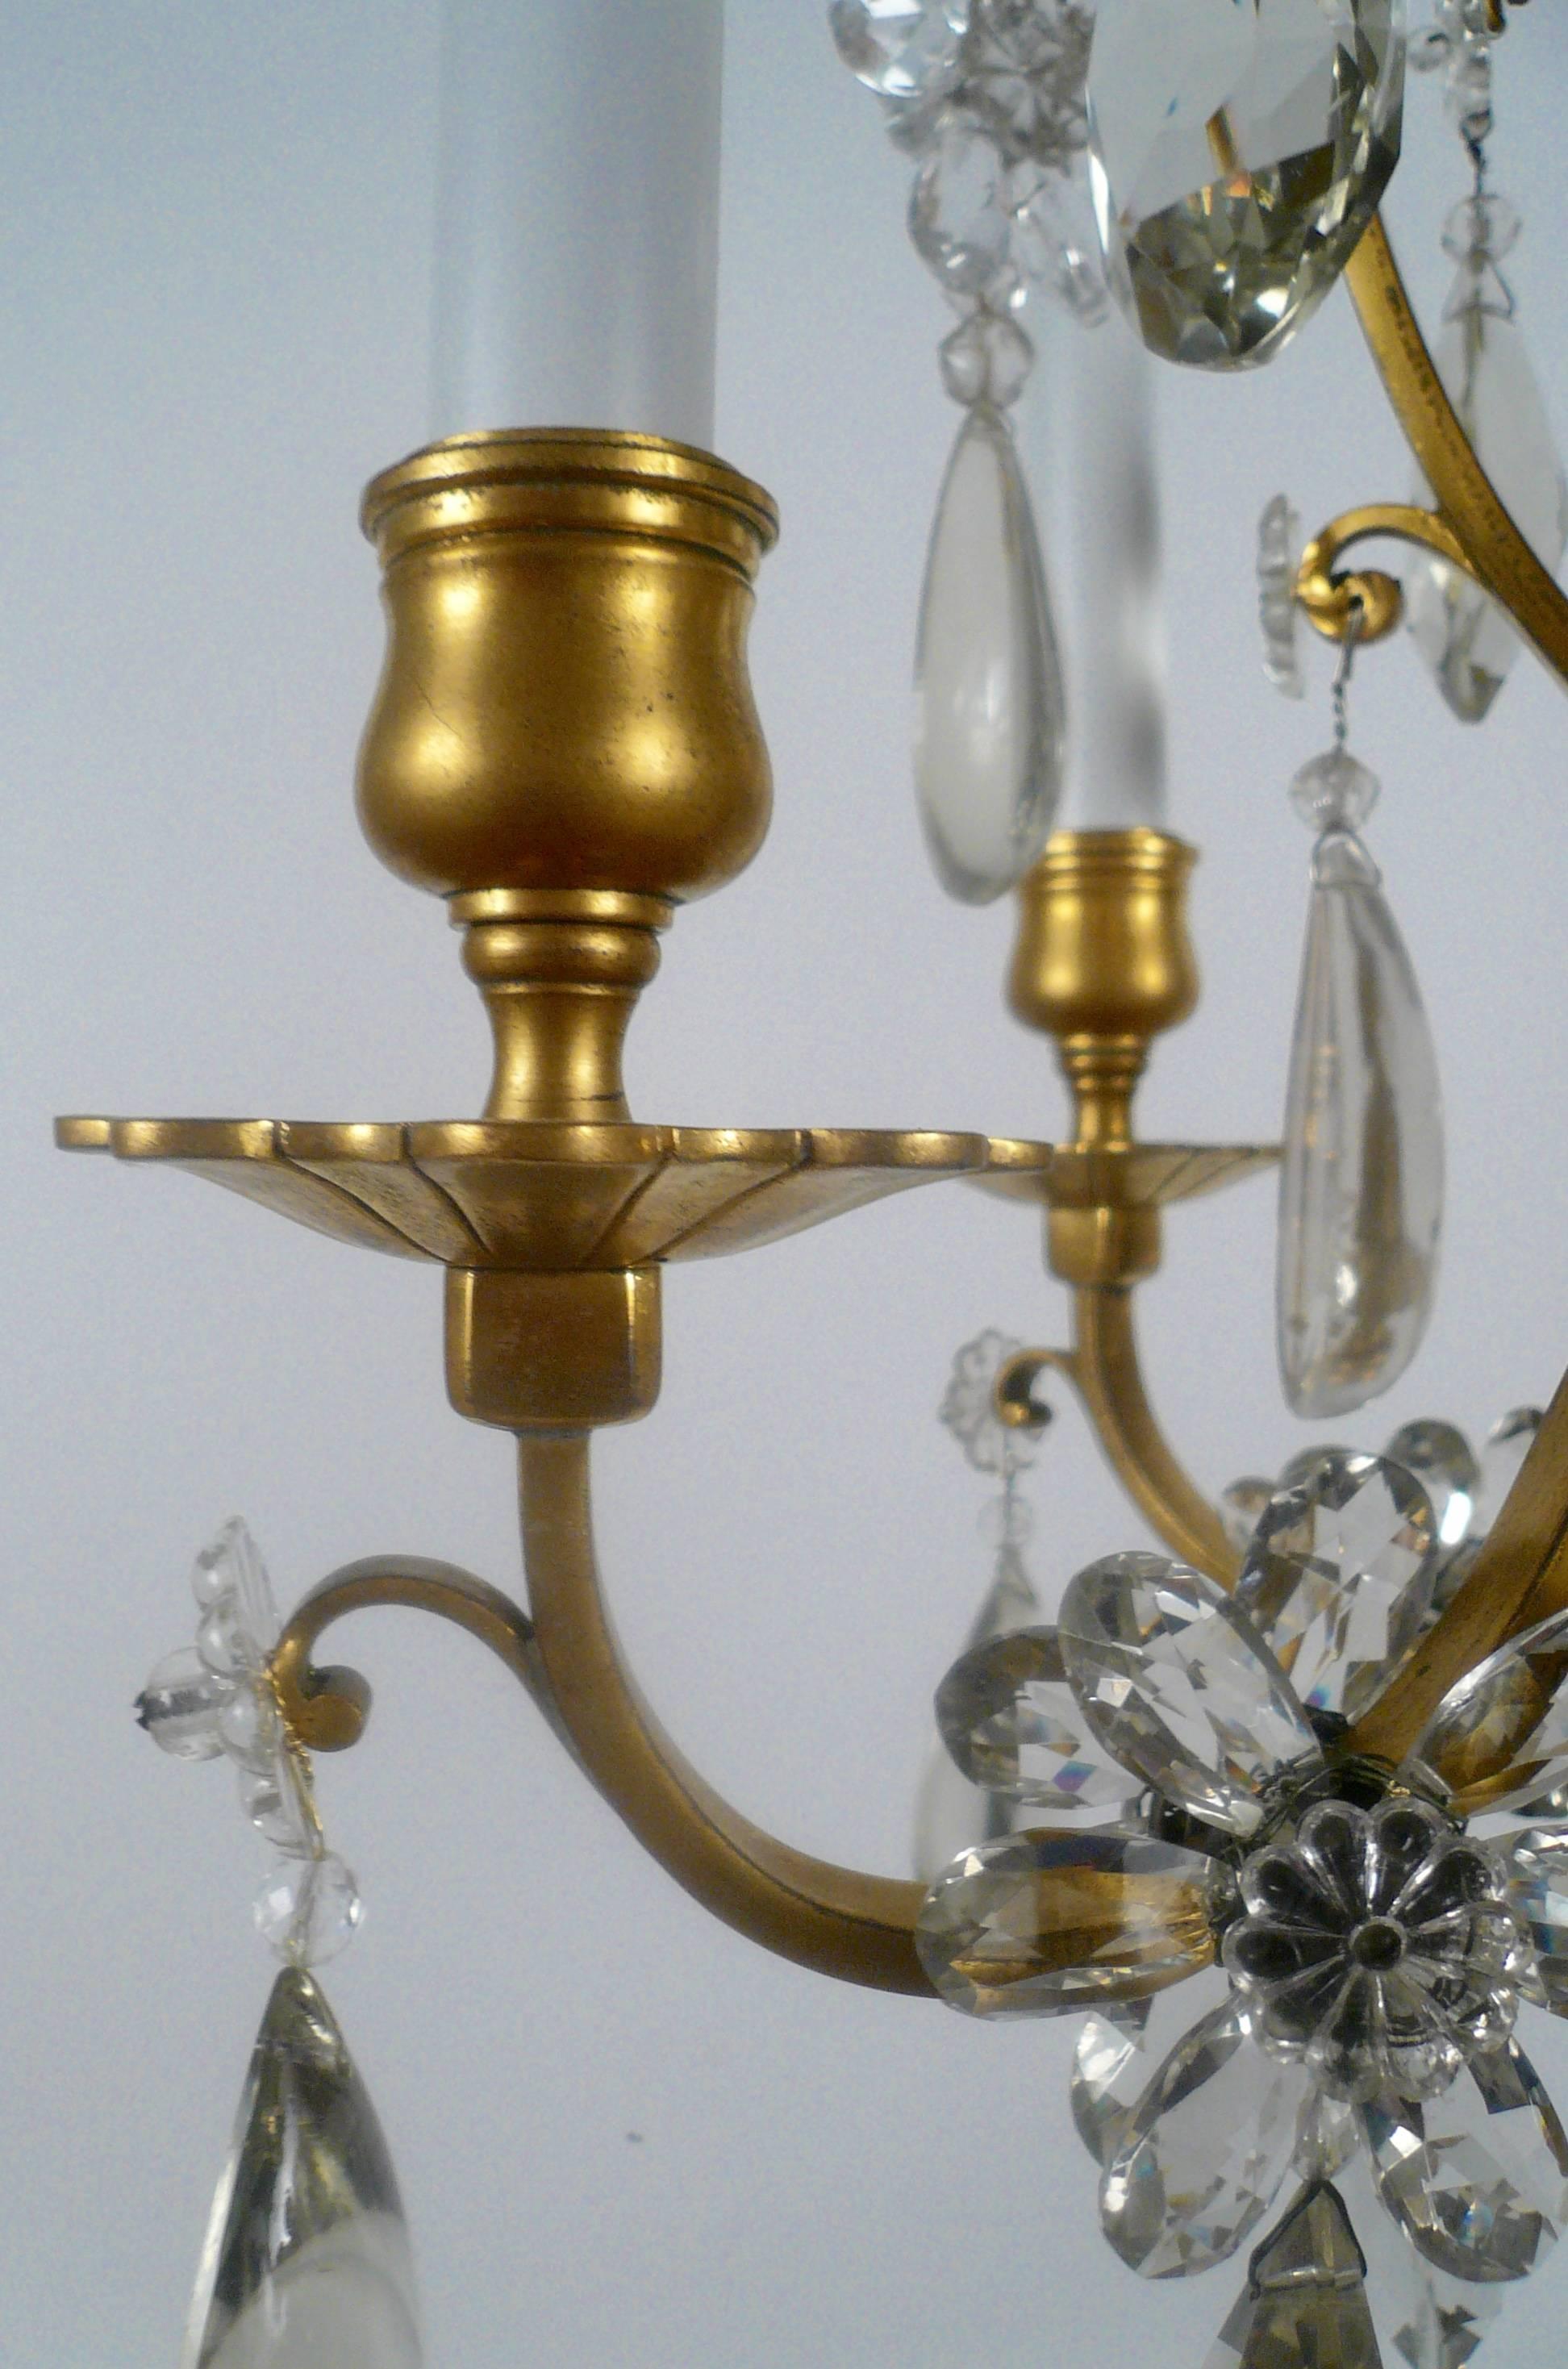 This extremely fine quality French fixture has a harp form central section hung with cut crystal floral pendants.